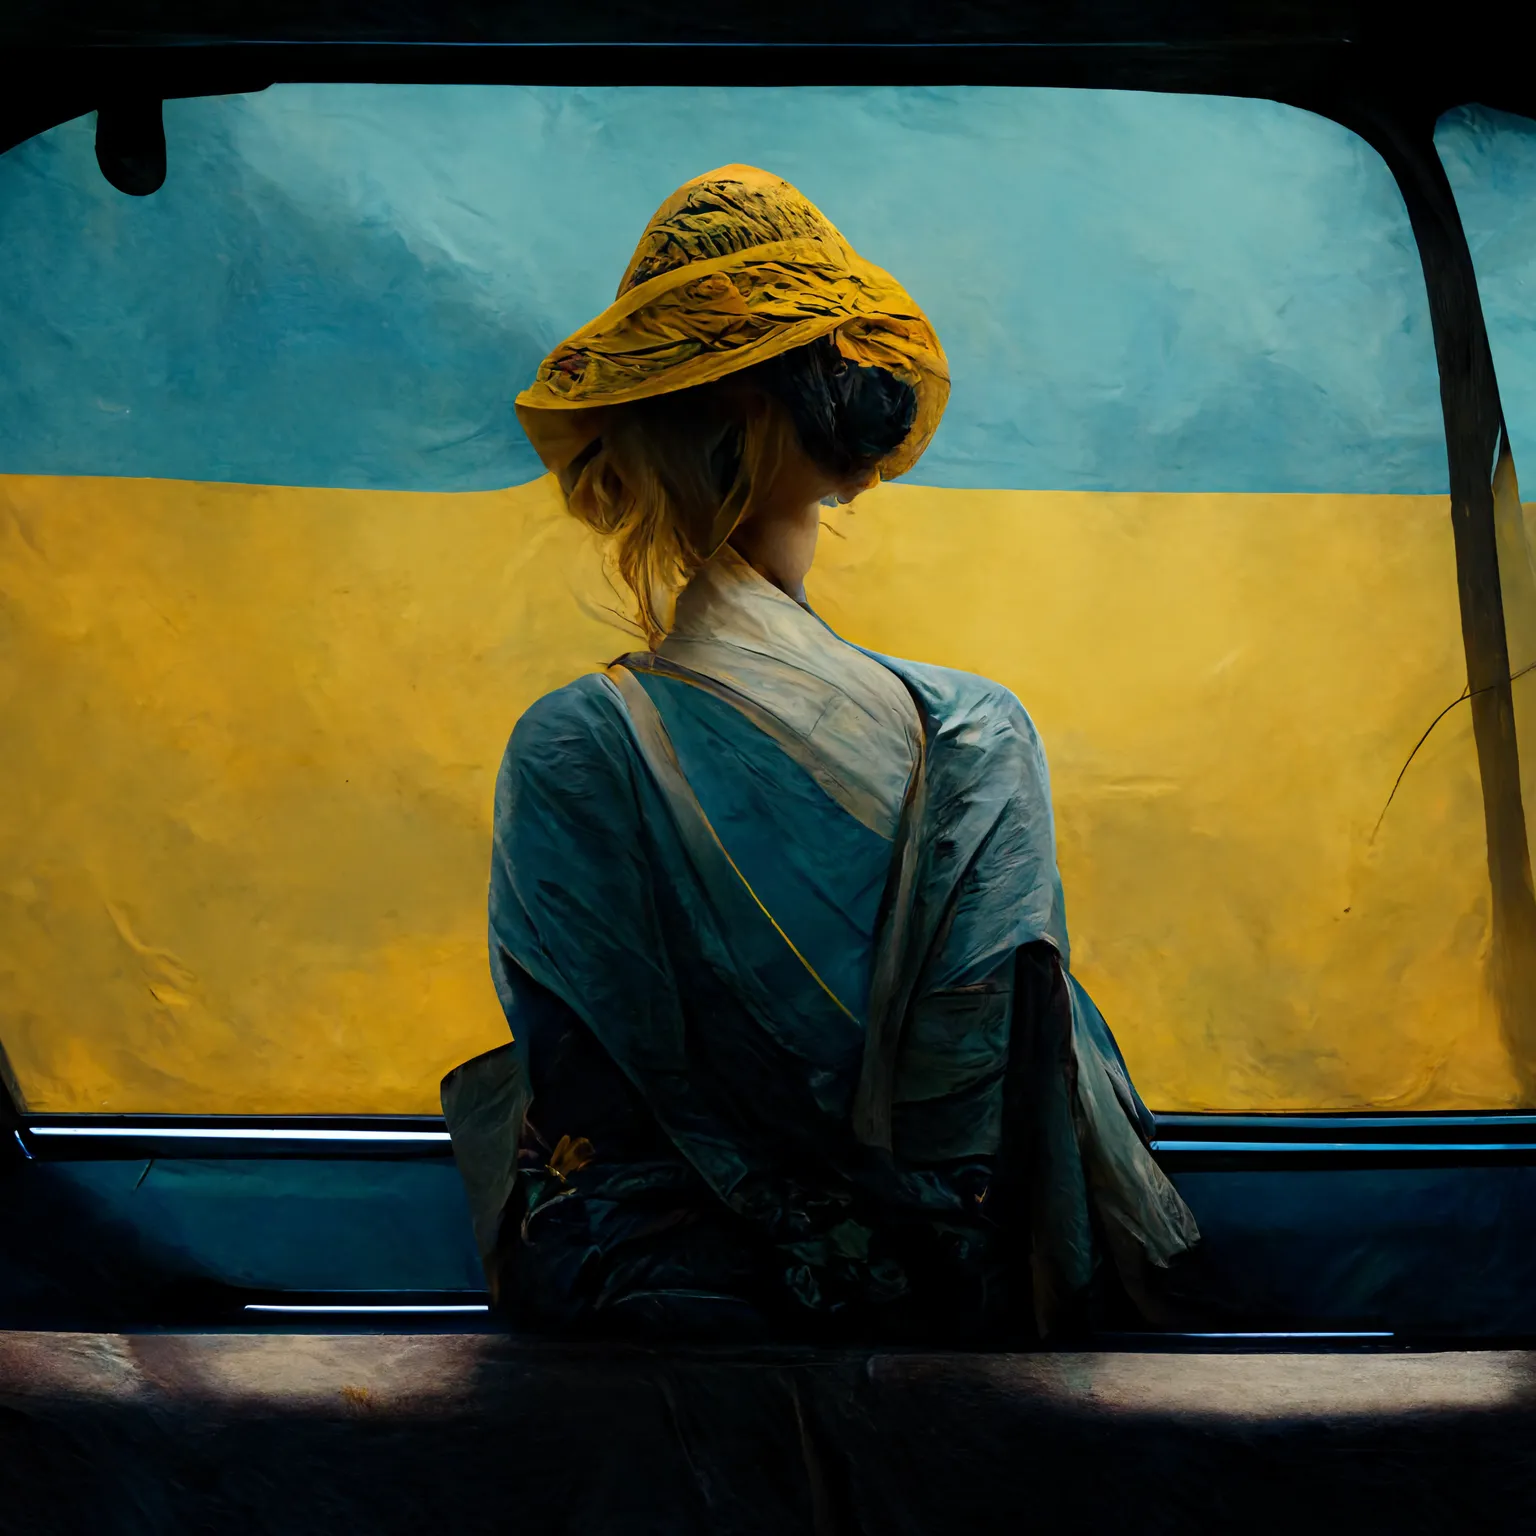 /_astro/kazbach_beautiful_blond_lady_in_the_back_of_a_volkswagon_bus_wi_ad51388c-f0bf-497a-9f50-7d6962acb327.png.9ba97f48.webp